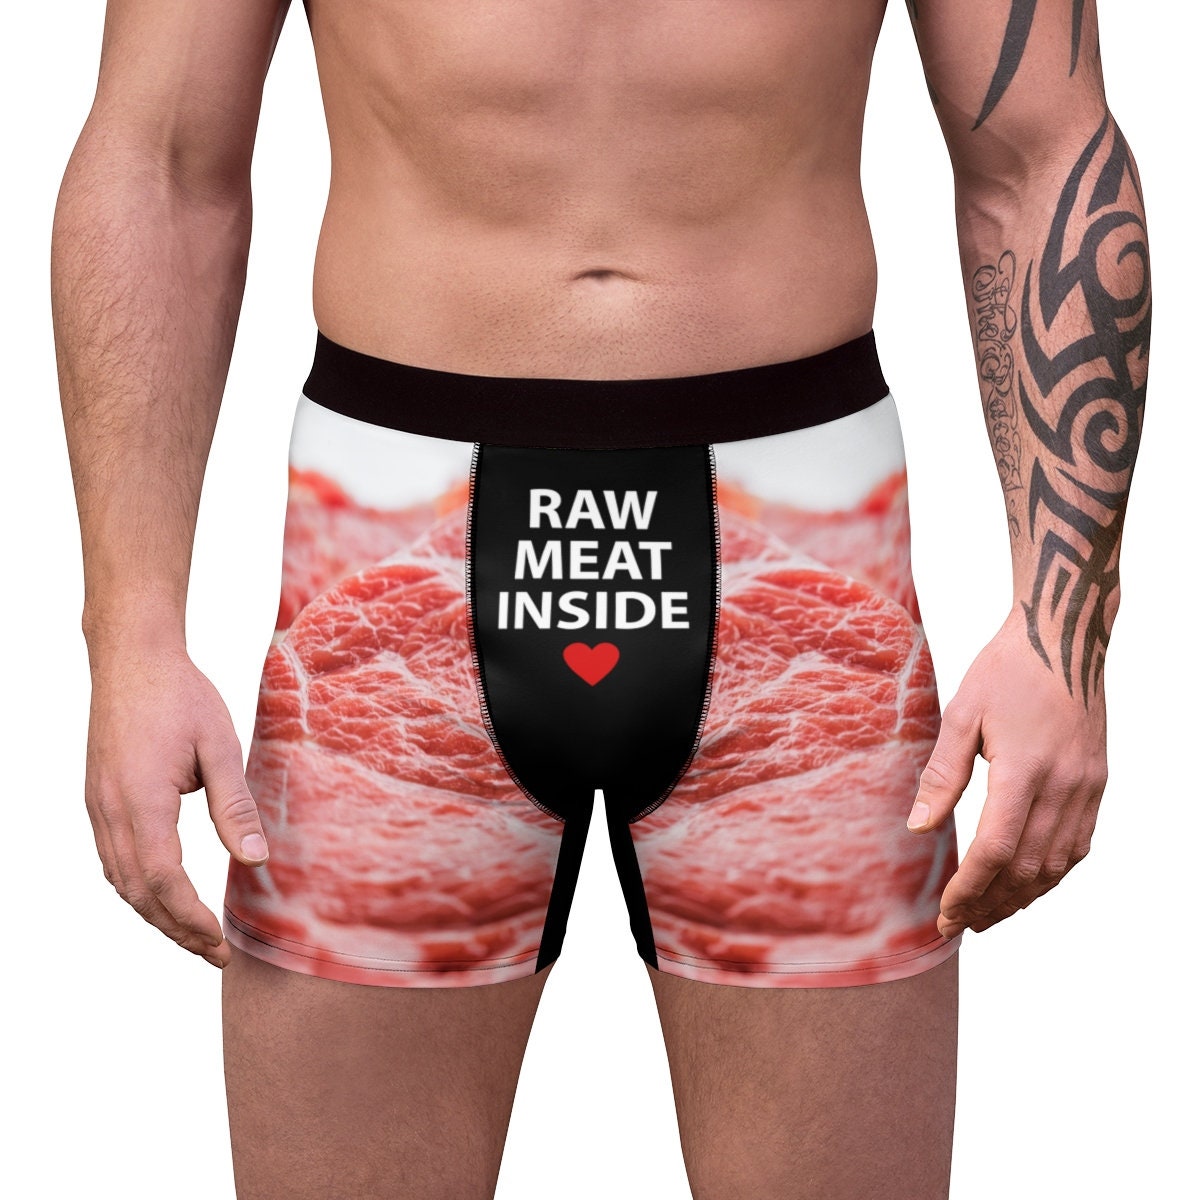 I Take My Meat Raw Mens Boxer Briefs Trunk Style Soft Comfortable